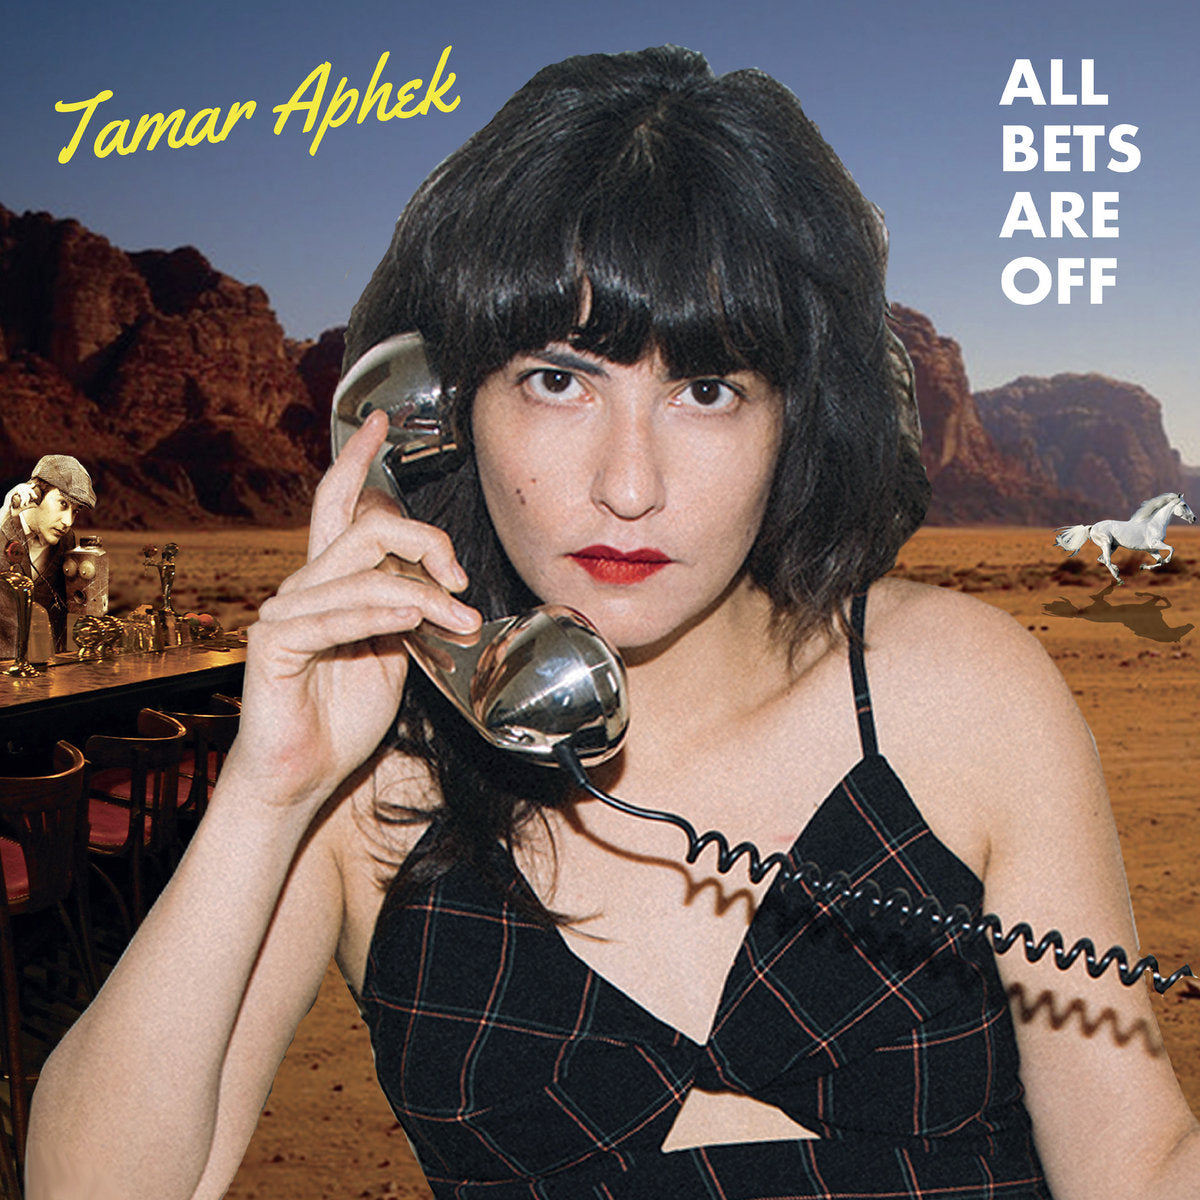 Tamar Aphek "All Bets Are Off" LP (2021)